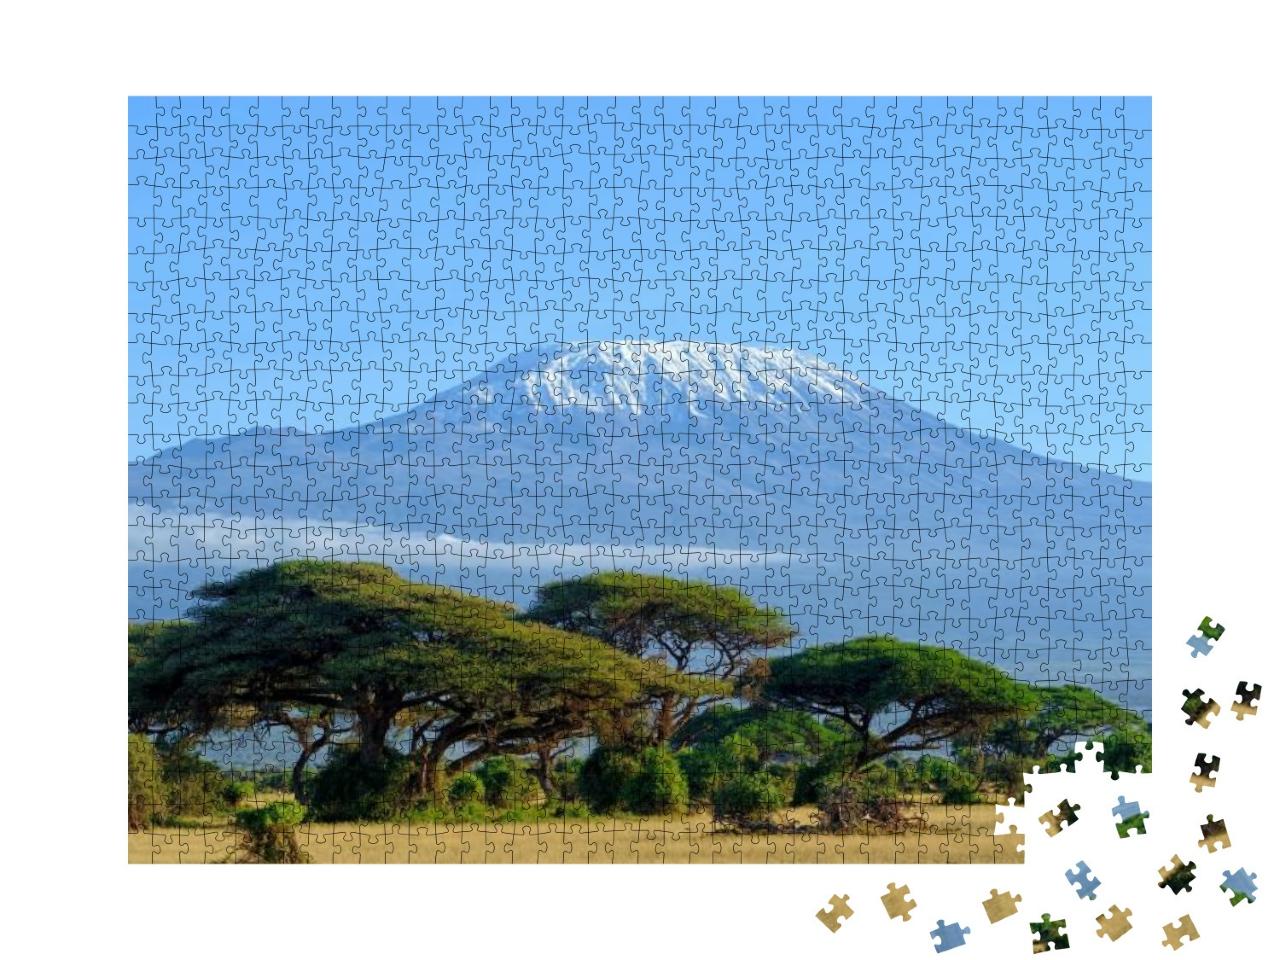 Snow on Top of Mount Kilimanjaro in Amboseli... Jigsaw Puzzle with 1000 pieces